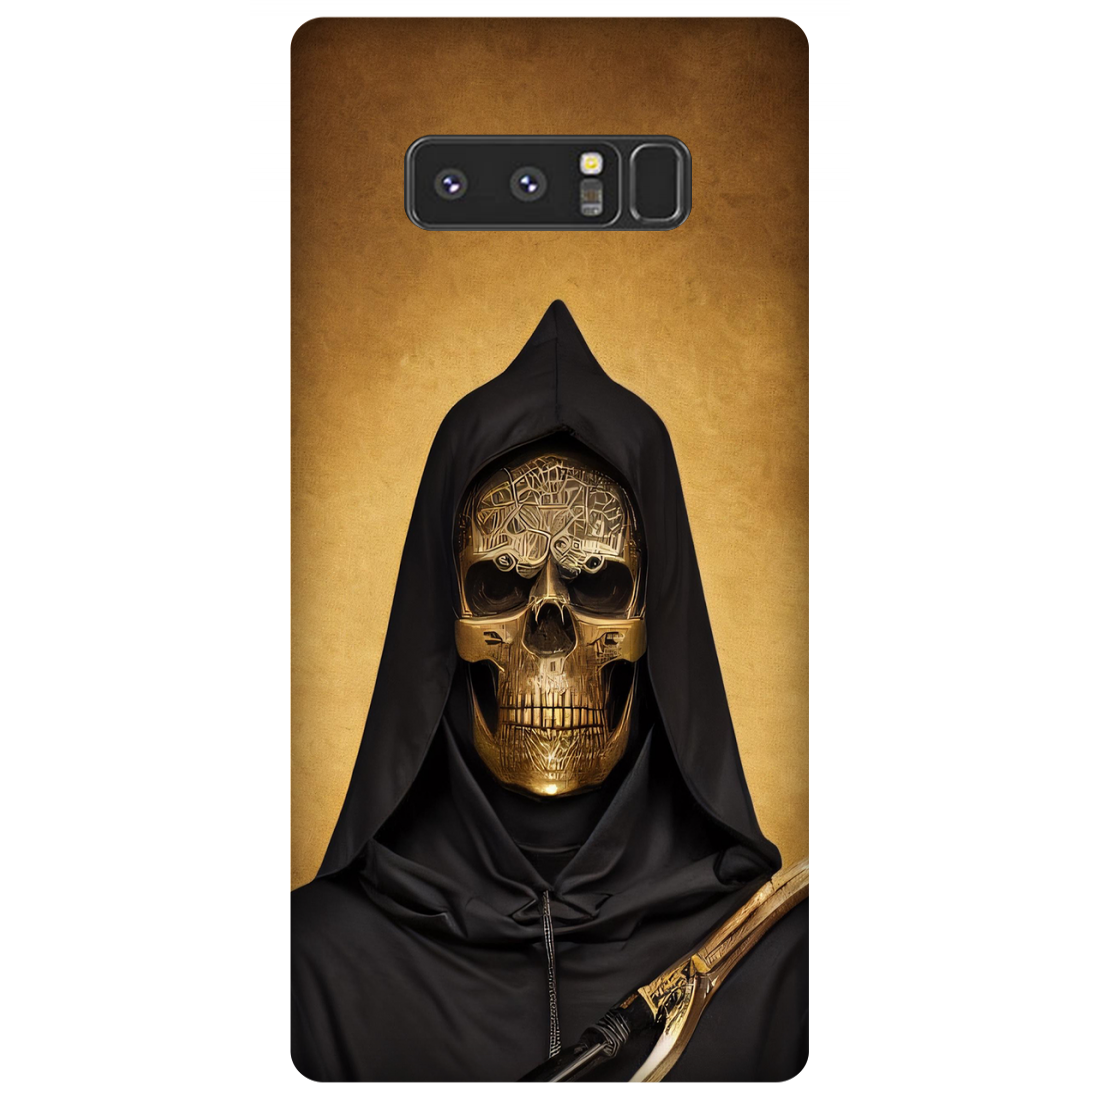 Mysterious Figure with a Ceremonial Sword Case Samsung Galaxy Note 8